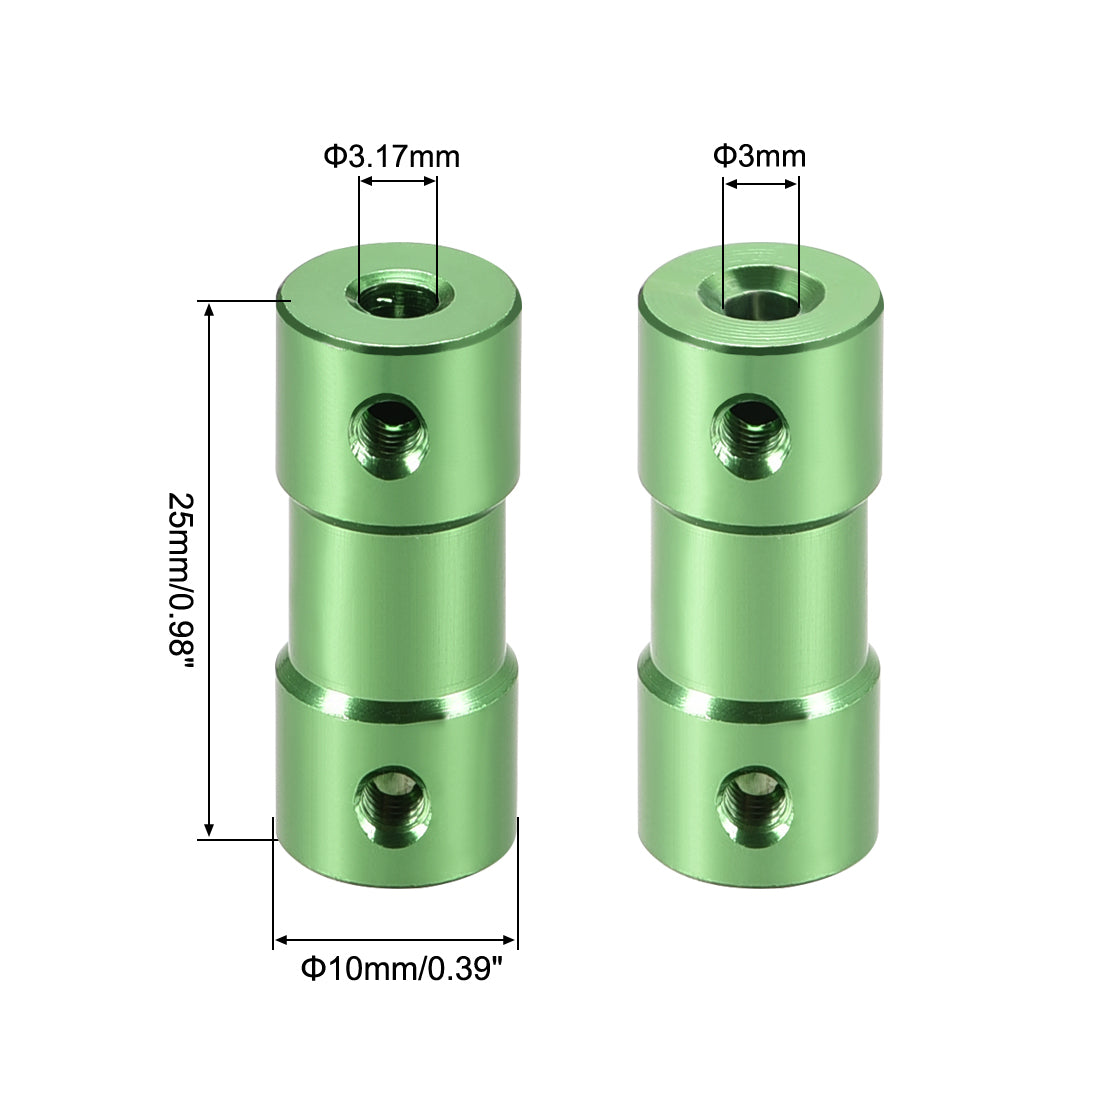 Uxcell Uxcell 3mm to 3.17mm Bore Rigid Coupling 25mm Length 10mm Diameter Aluminum Alloy Shaft Coupler Connector Green 2pcs